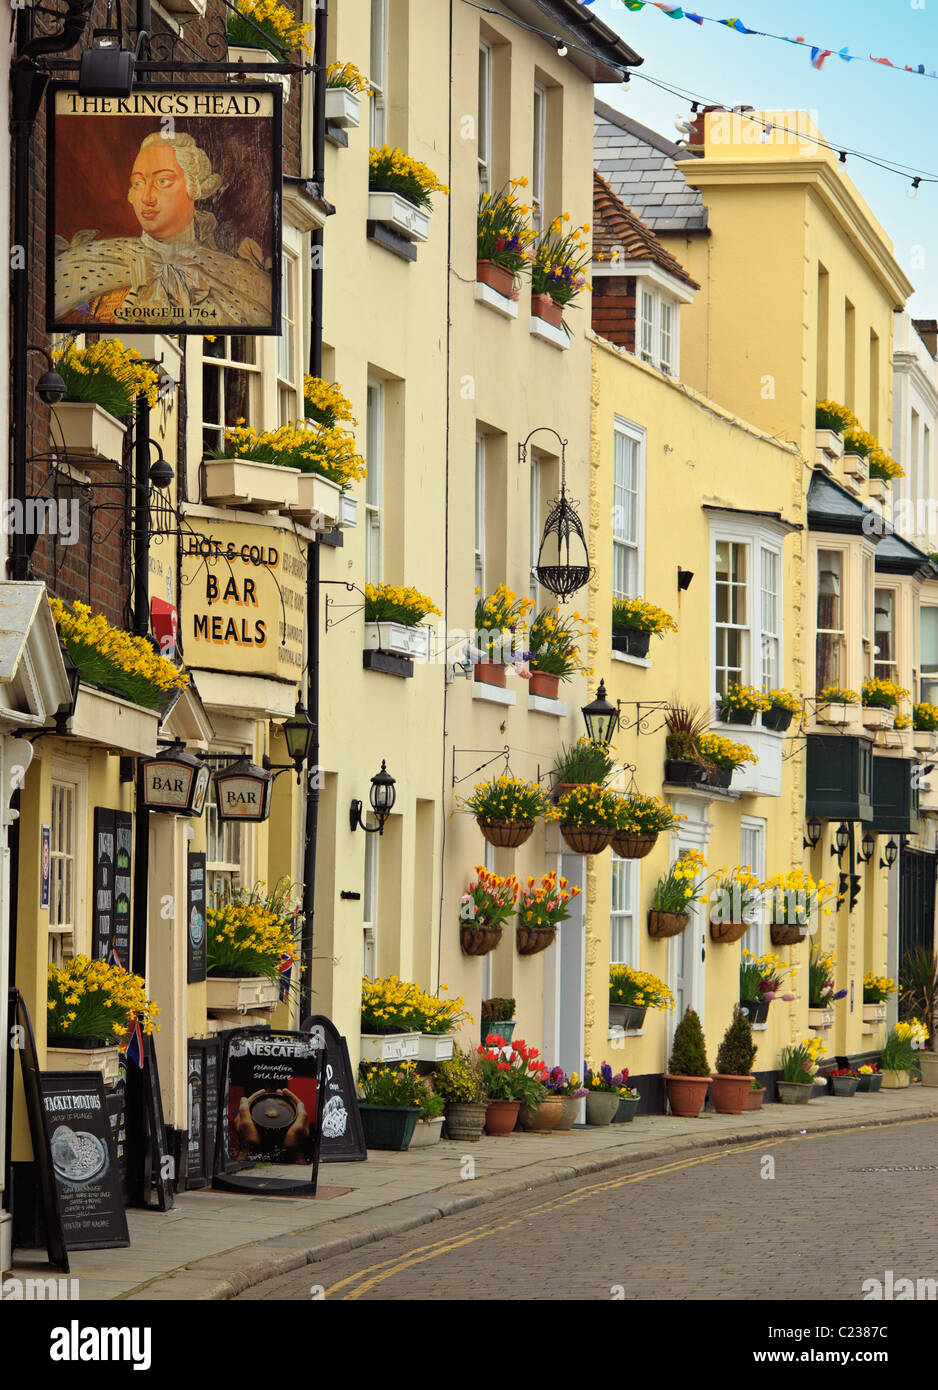 The Kings Head Public House Deal, decorated with over 3000 flowers. Stock Photo